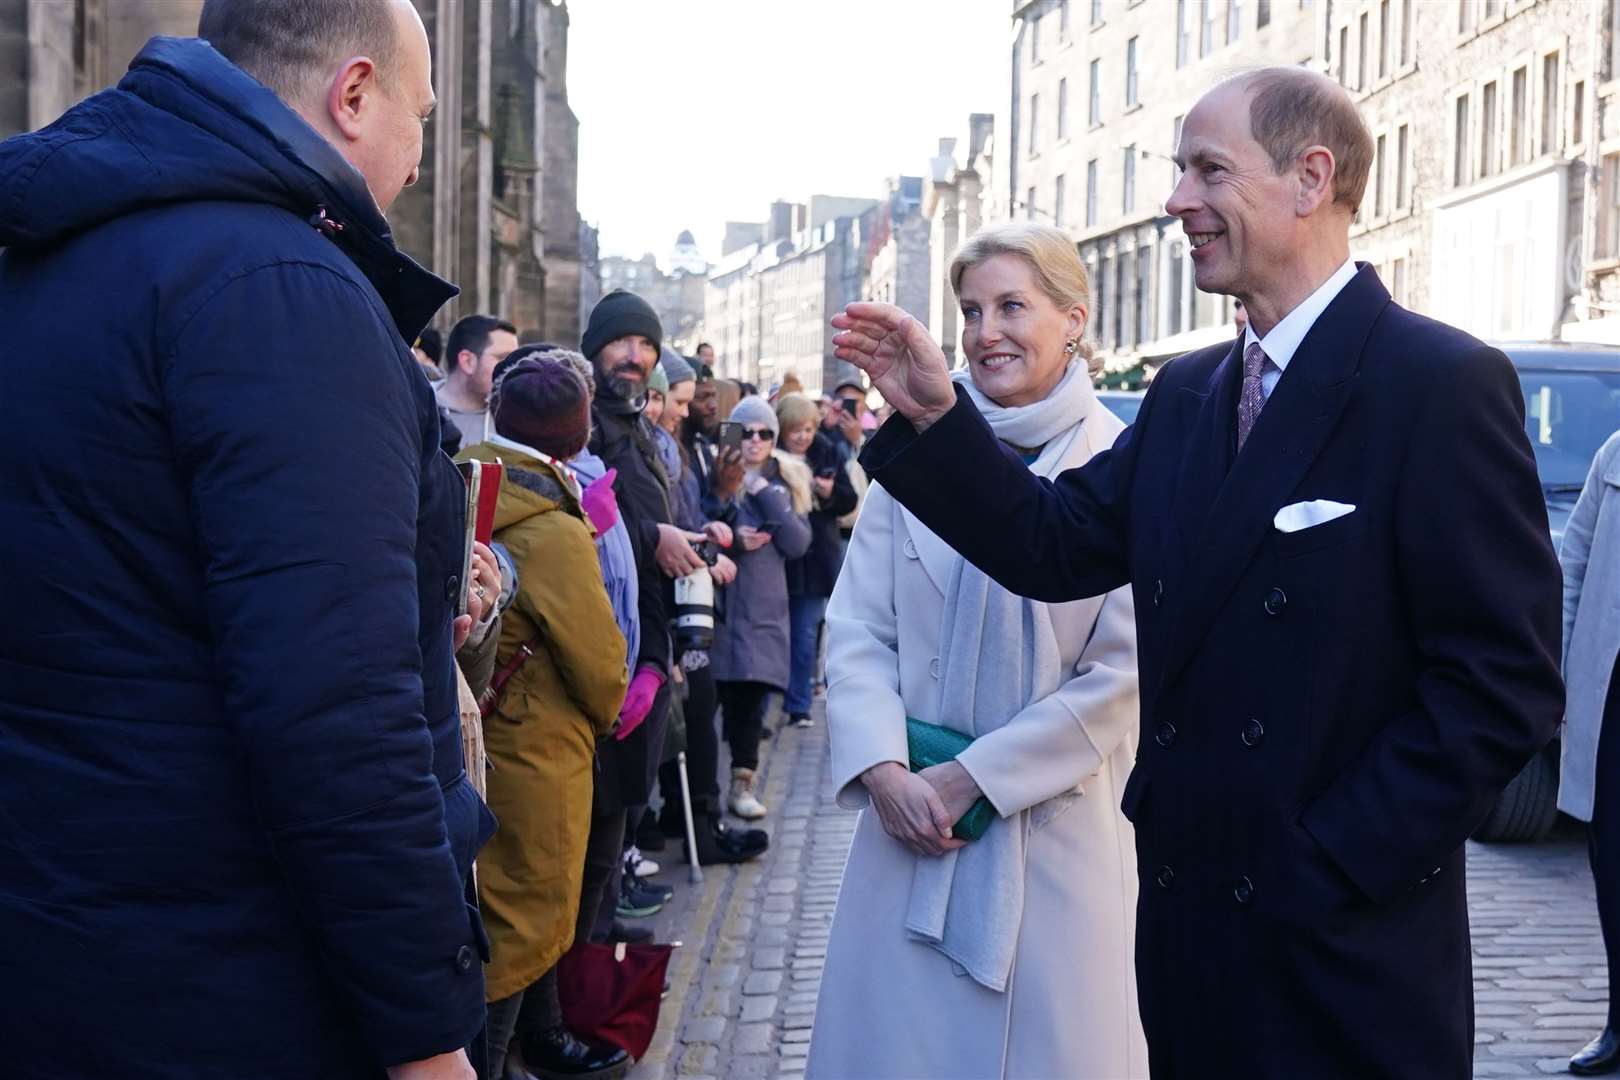 The new Duke and Duchess of Edinburgh meet members of the public as they attend a ceremony at the City Chambers in Edinburgh (Jane Barlow/PA)